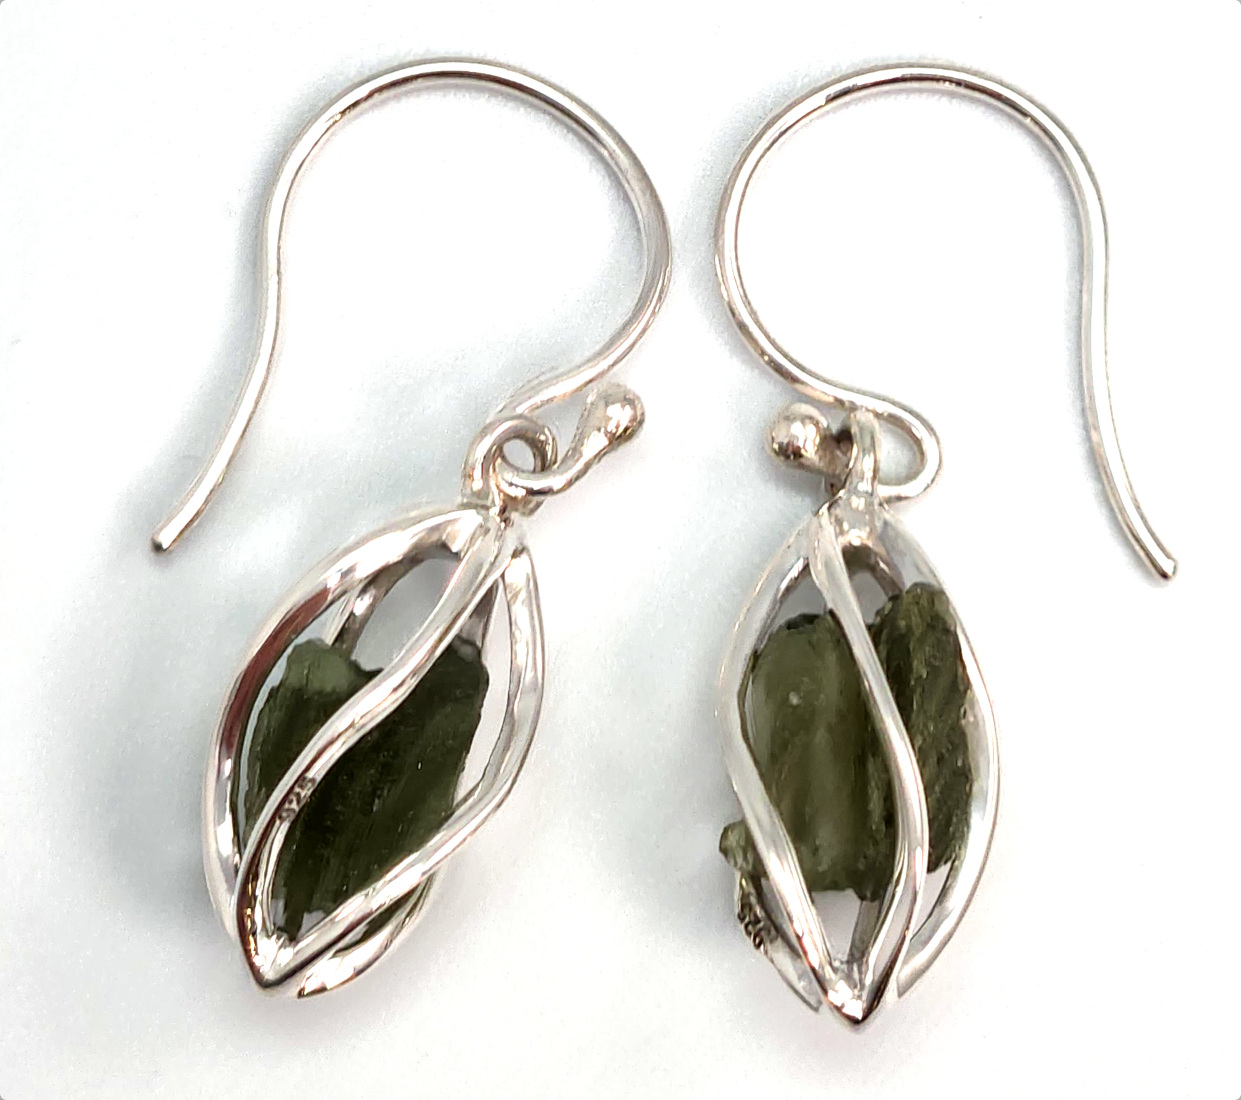 Moldavite cage set earrings by Starborn Creations